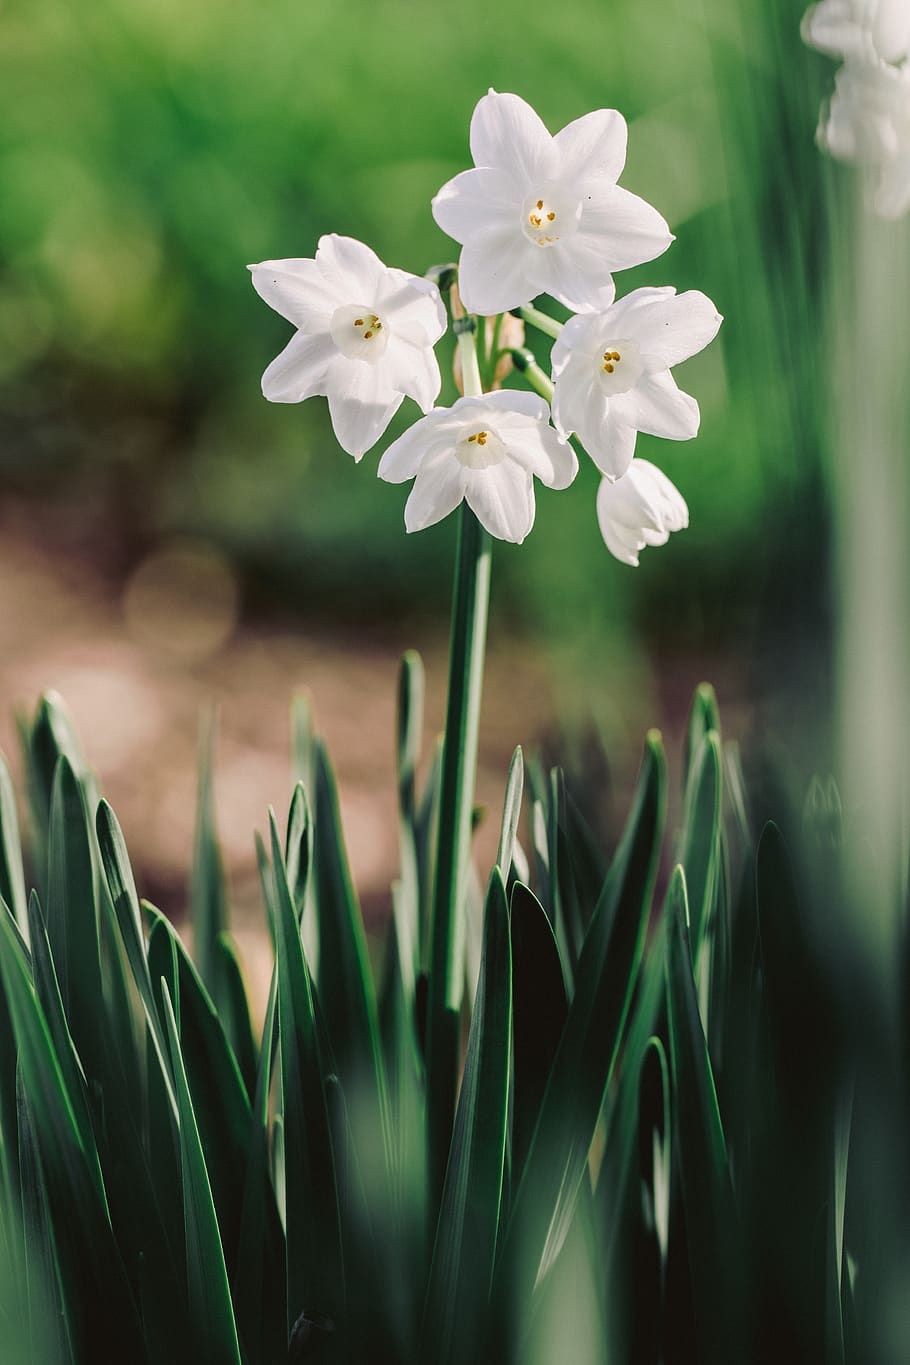 paperwhite daffodils in bloom close-up photography, flower, plant, HD wallpaper